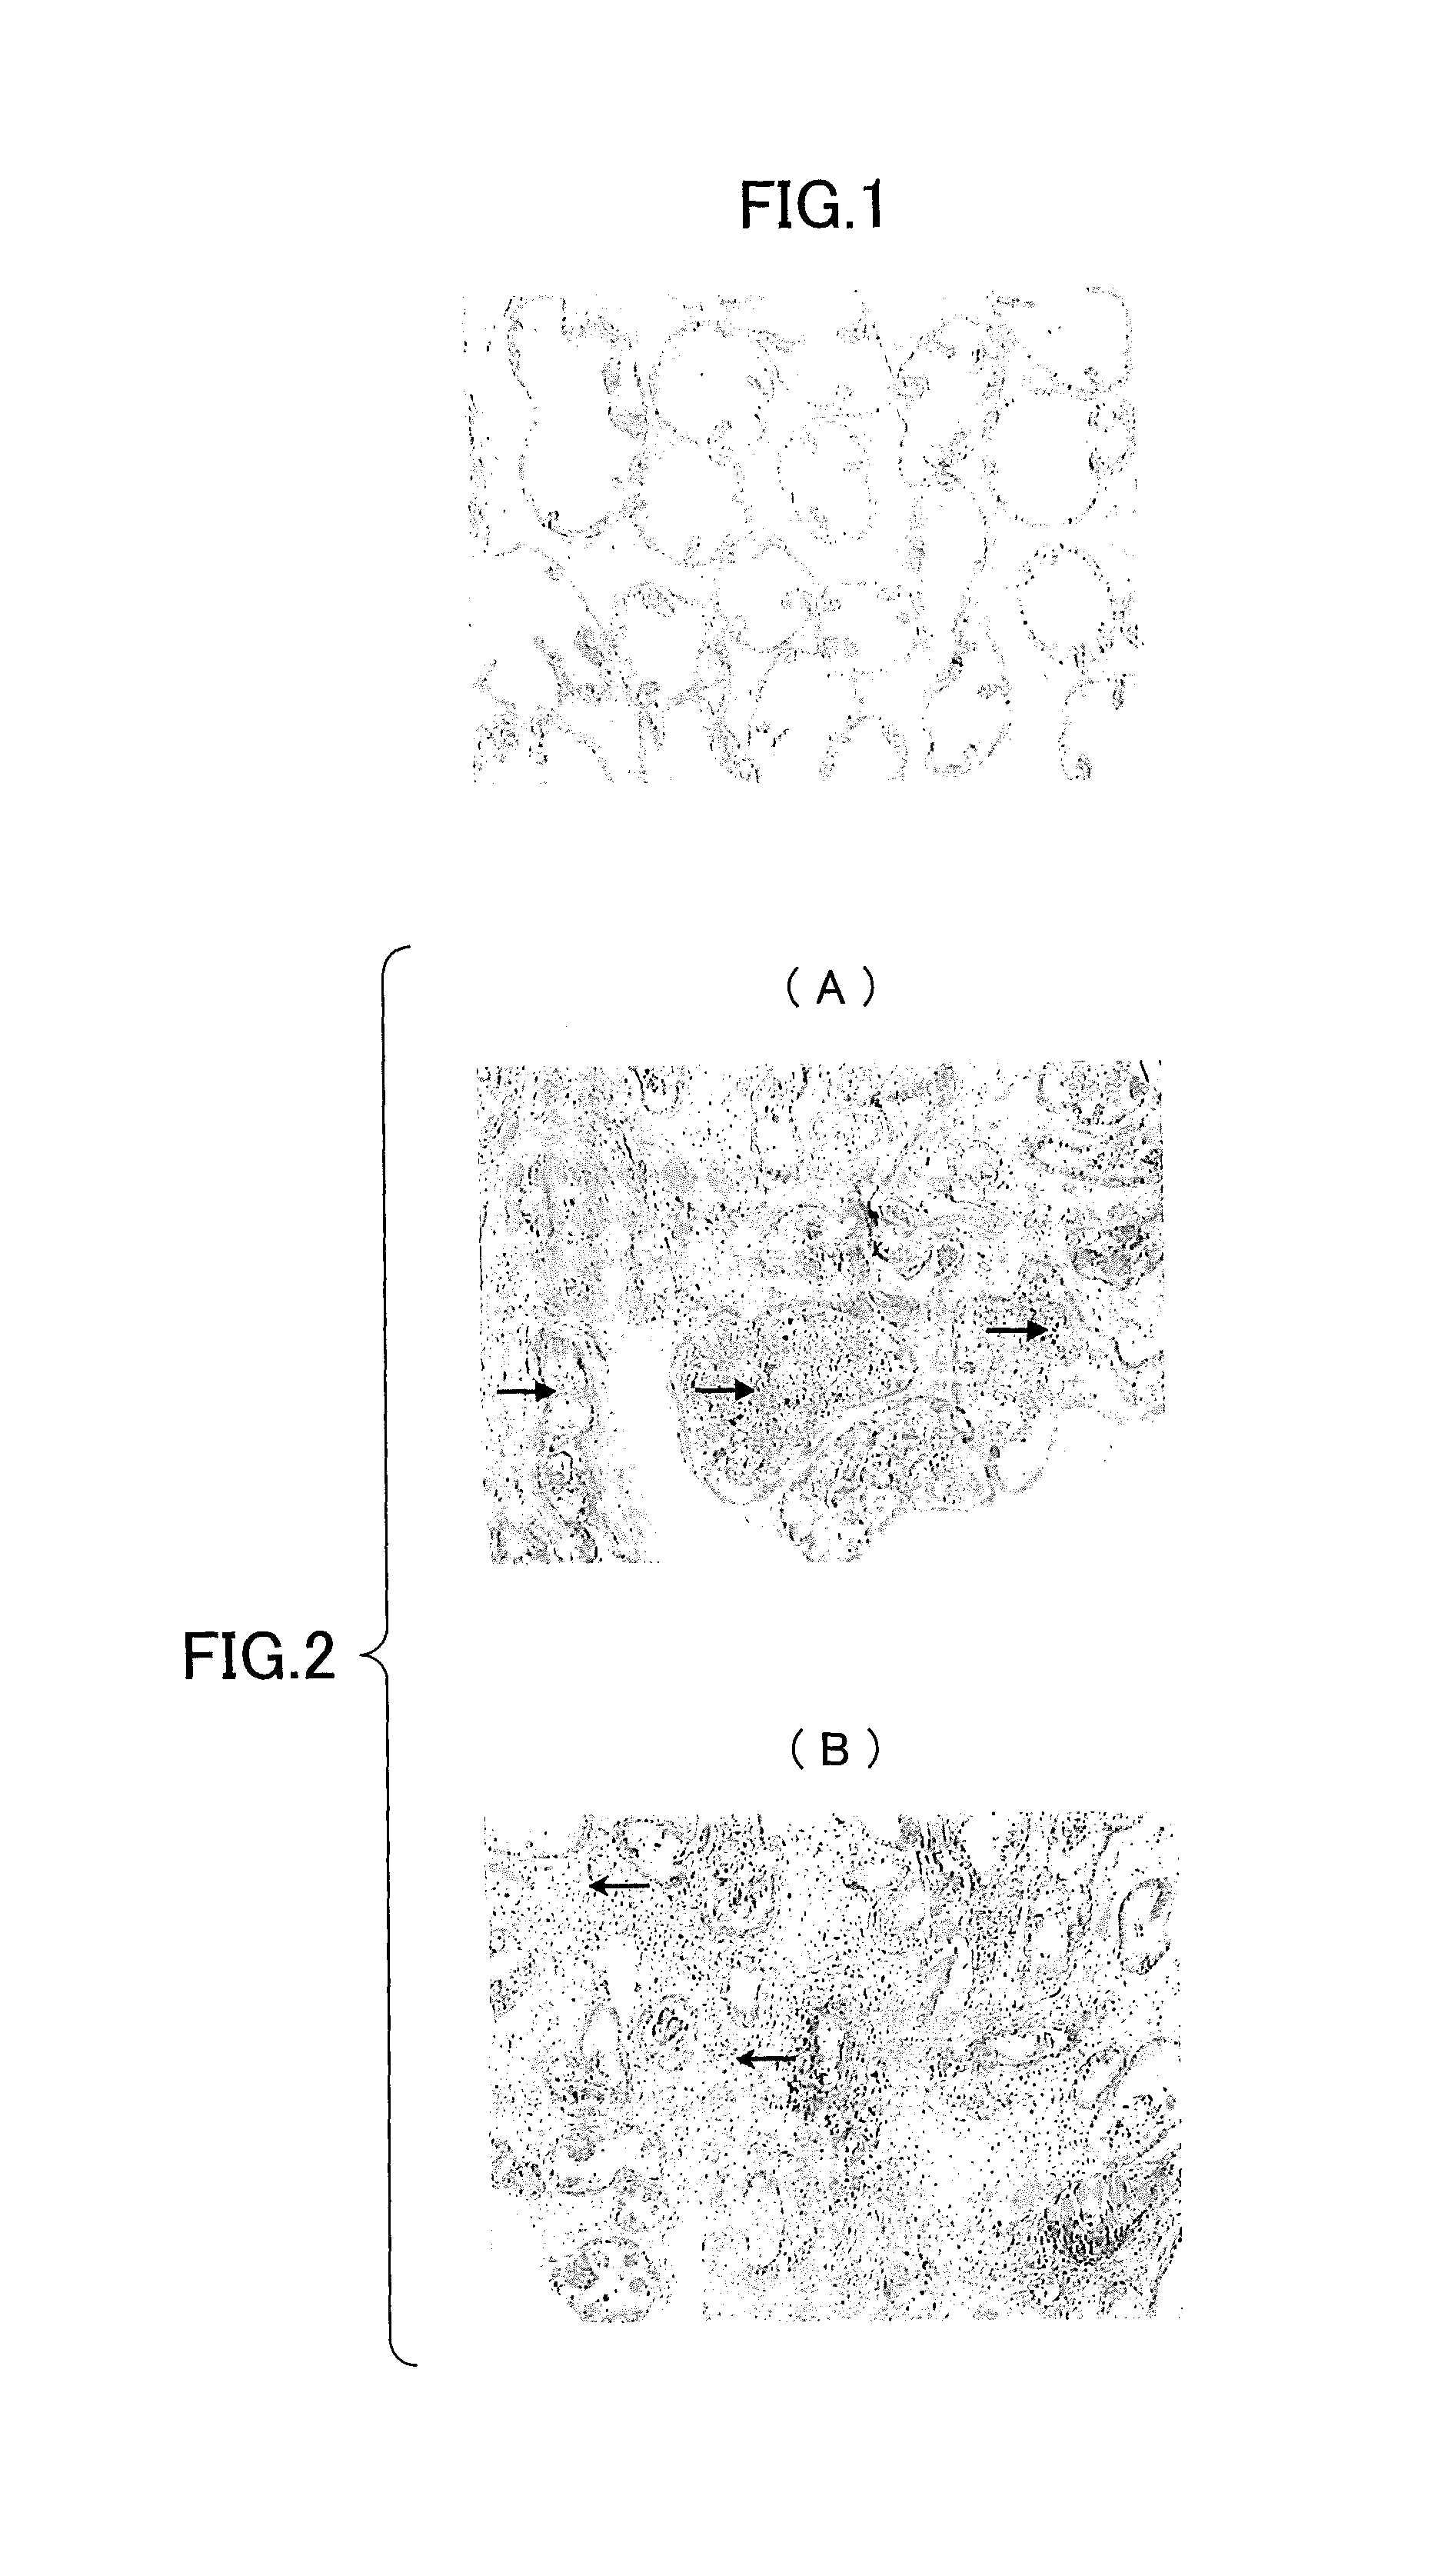 Therapeutic agent for a lower urinary tract disease and an agent for improving a lower urinary tract symptom